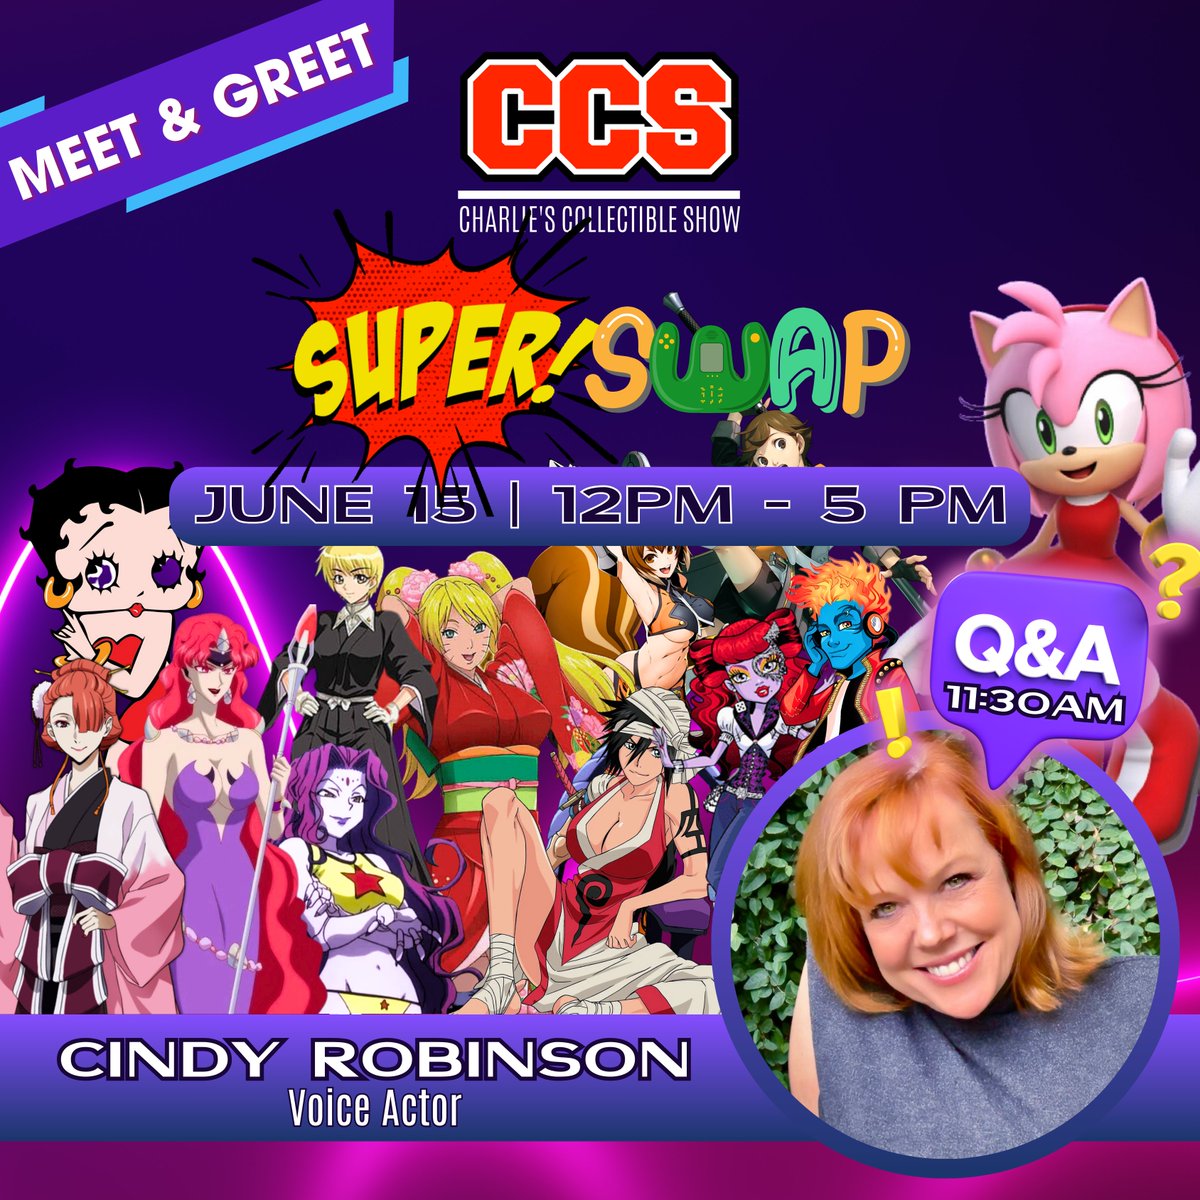 ChatGPT
#Sonic fans, assemble! Join us at #CCSSuperSwap on June 15th with @TheScottDreier & @RedHeadSaidProd!

Enjoy a fun-filled day with 60+ vendors featuring collectibles from #RetroVideoGames to #ActionFigures, #Legos, #HotWheels #TradingCards, & more at 40,000 sqft of fun!🎉